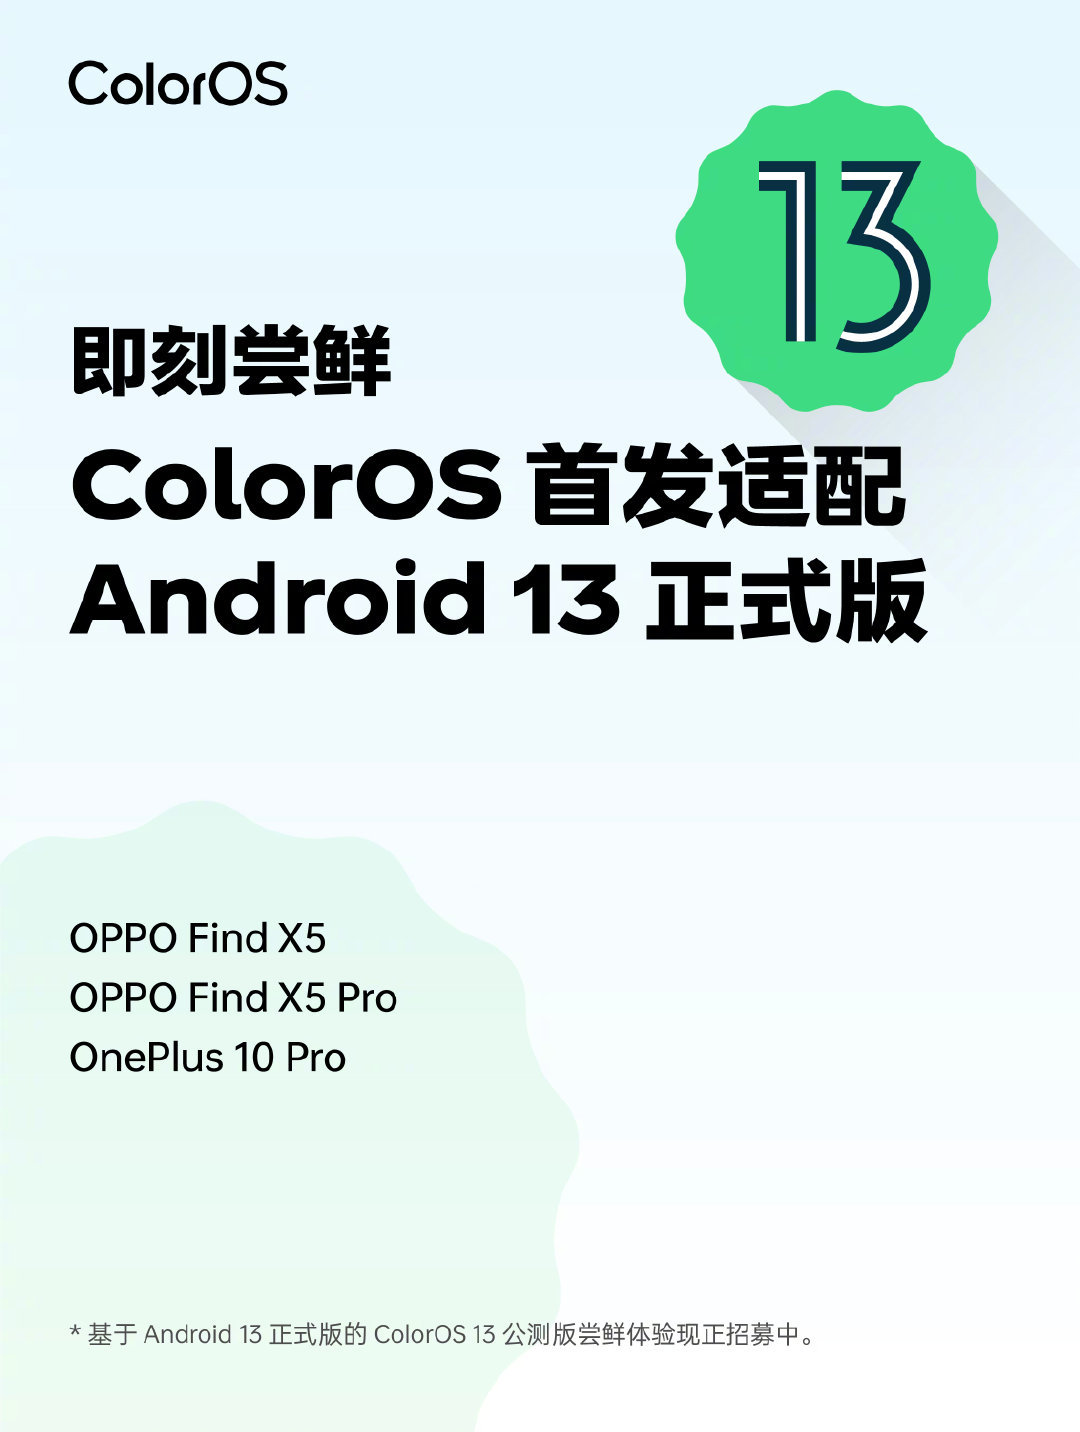 ColorOS 首发适配 Android 13 正式版：首批Find X5系列、一加10 Pro